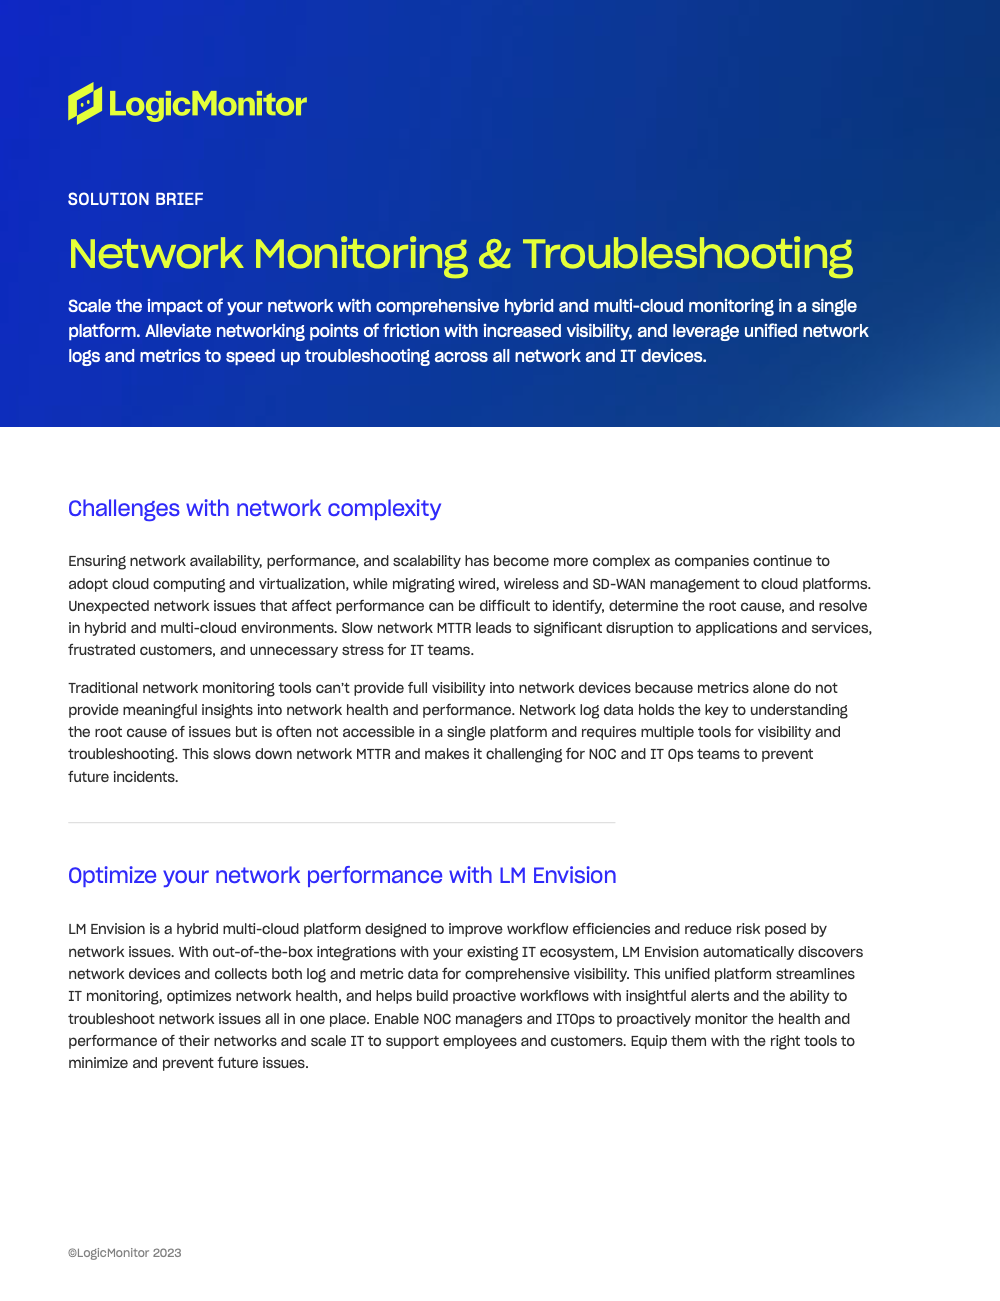 Network monitoring and troubleshooting cover